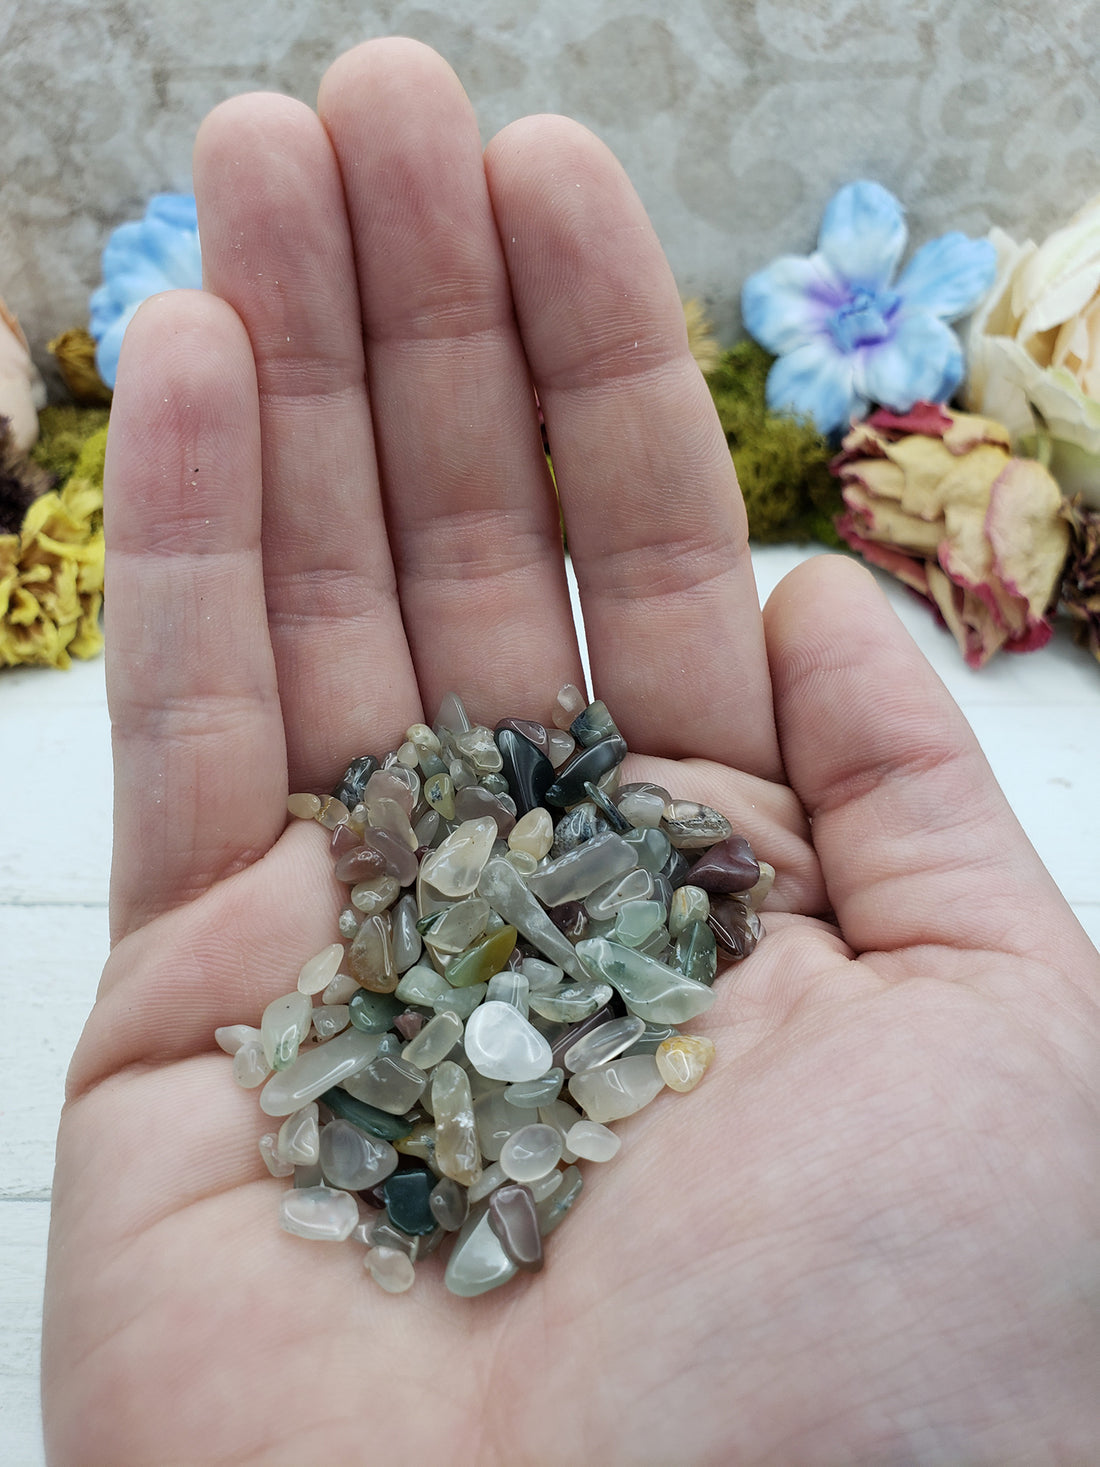 One ounce of mixed agate chips in hand